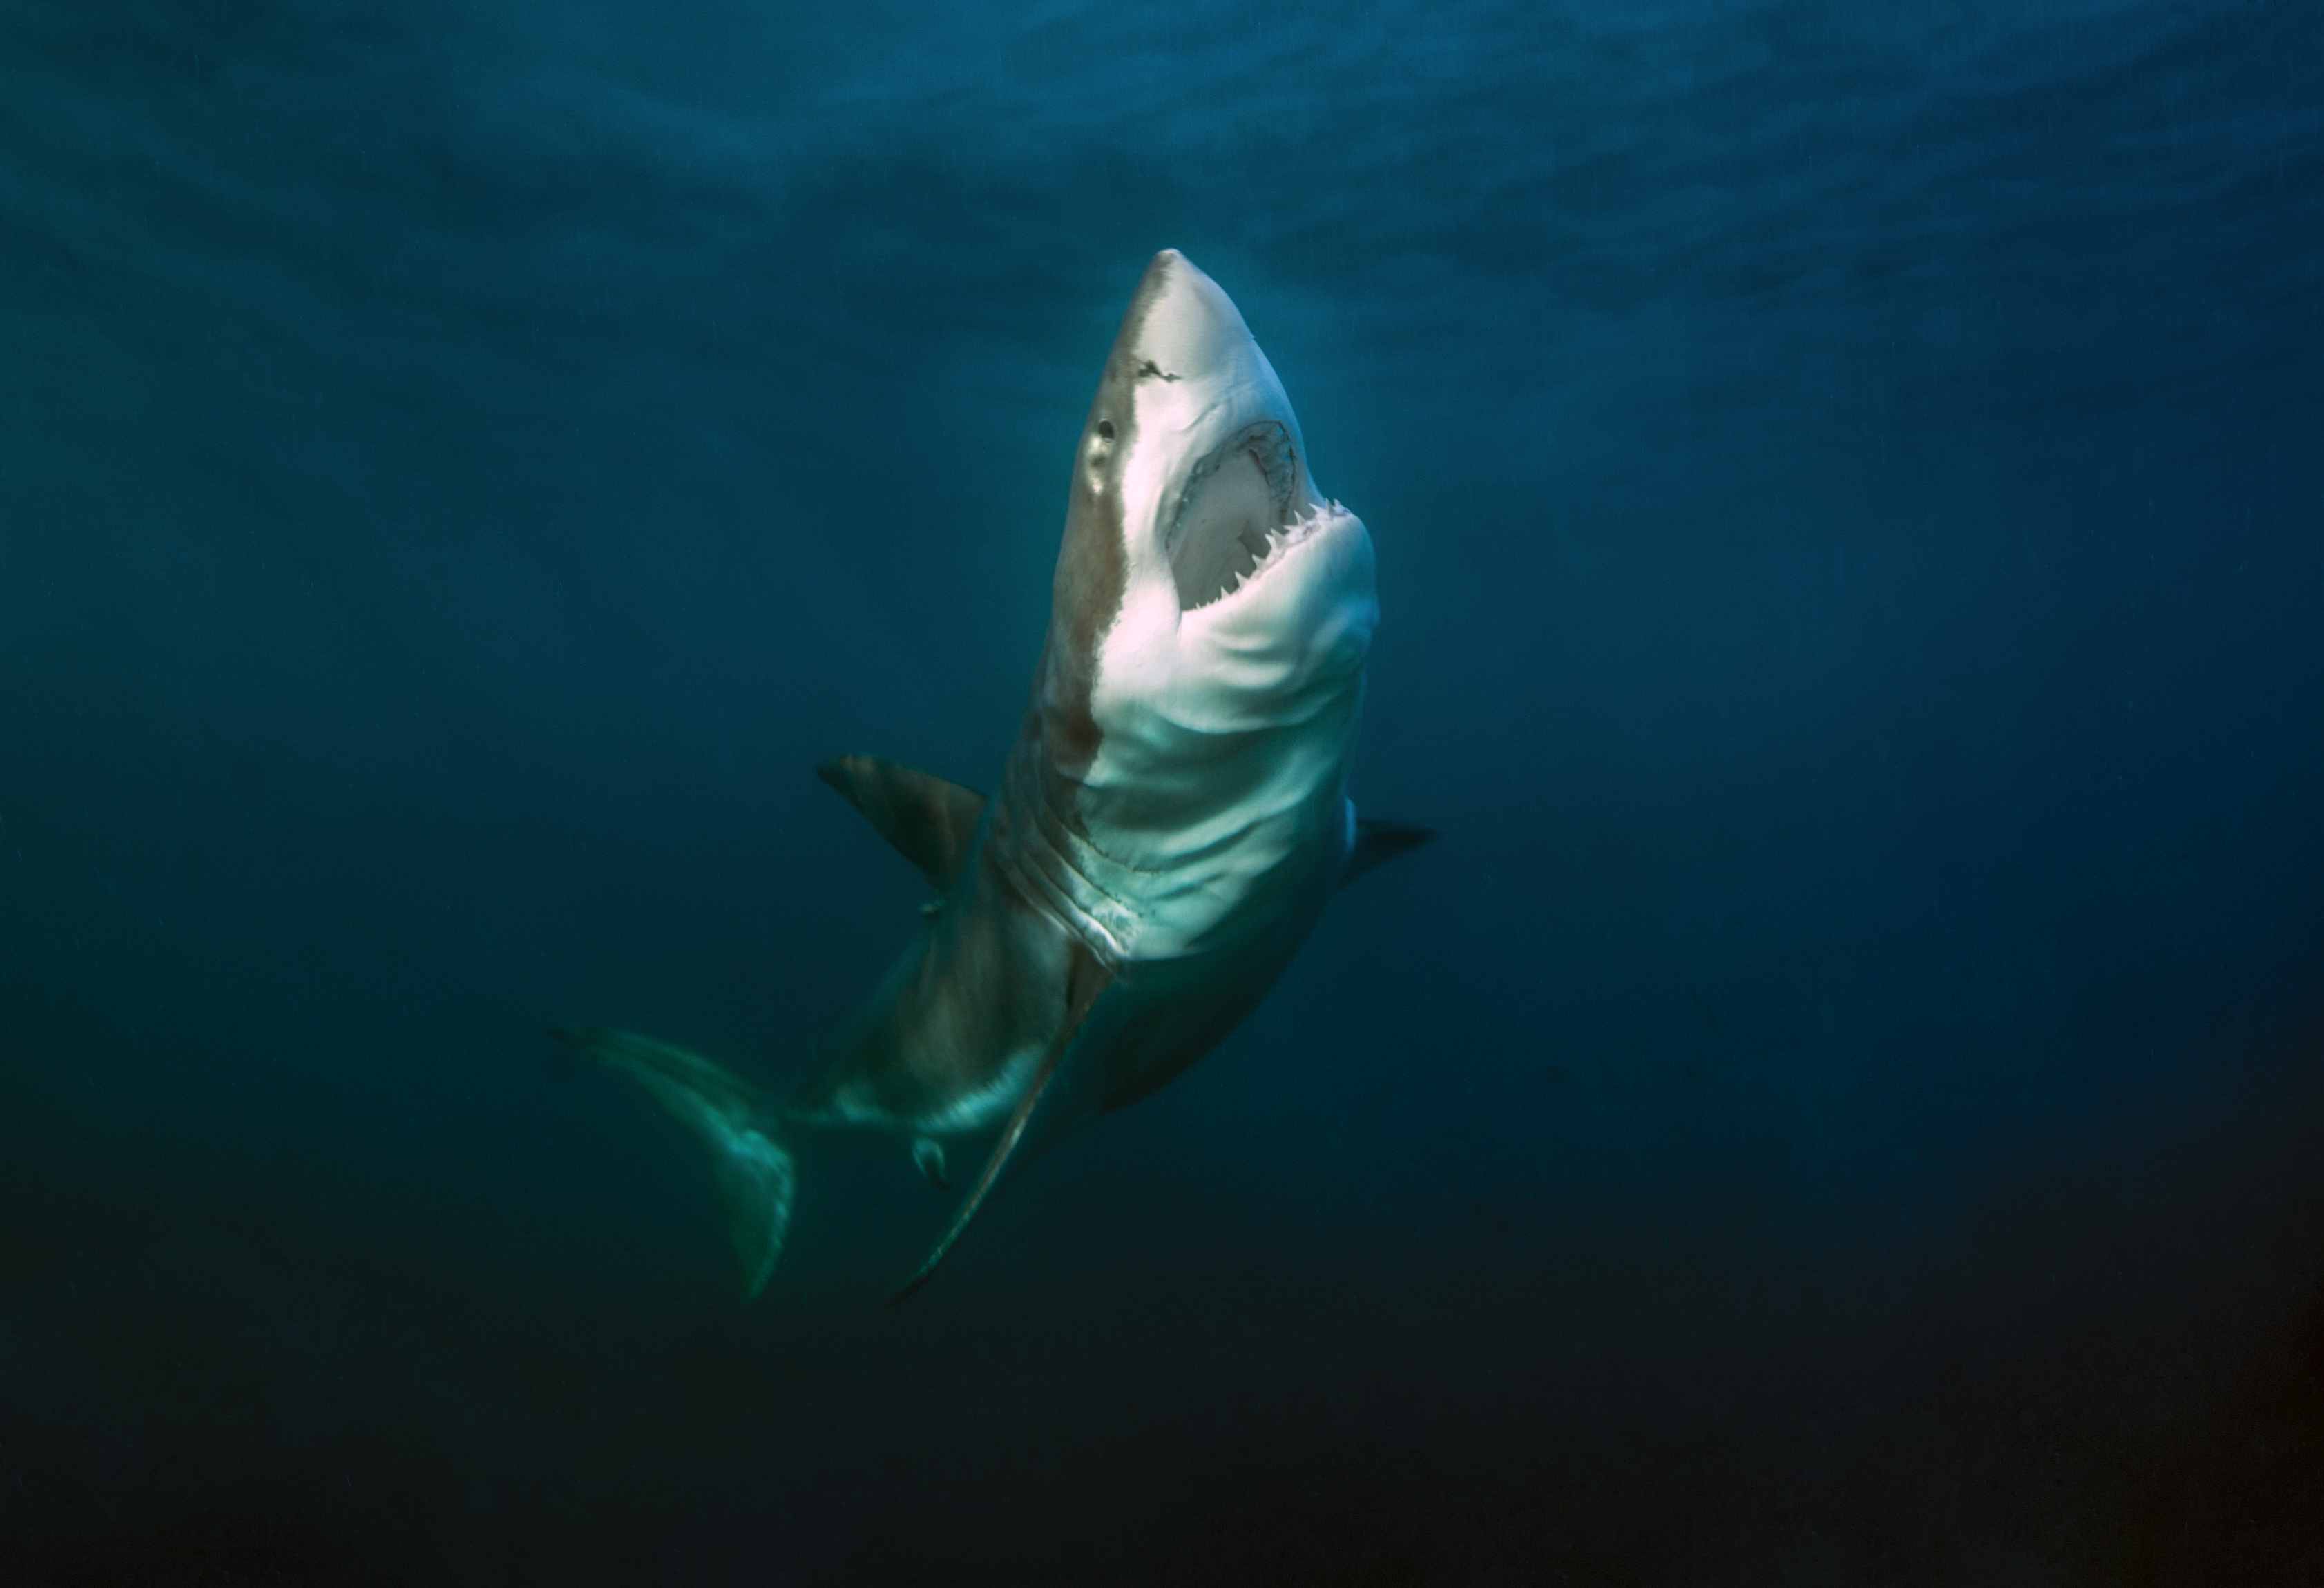 The great white shark individual known as Mrs Moo. Photo by Andrew Fox